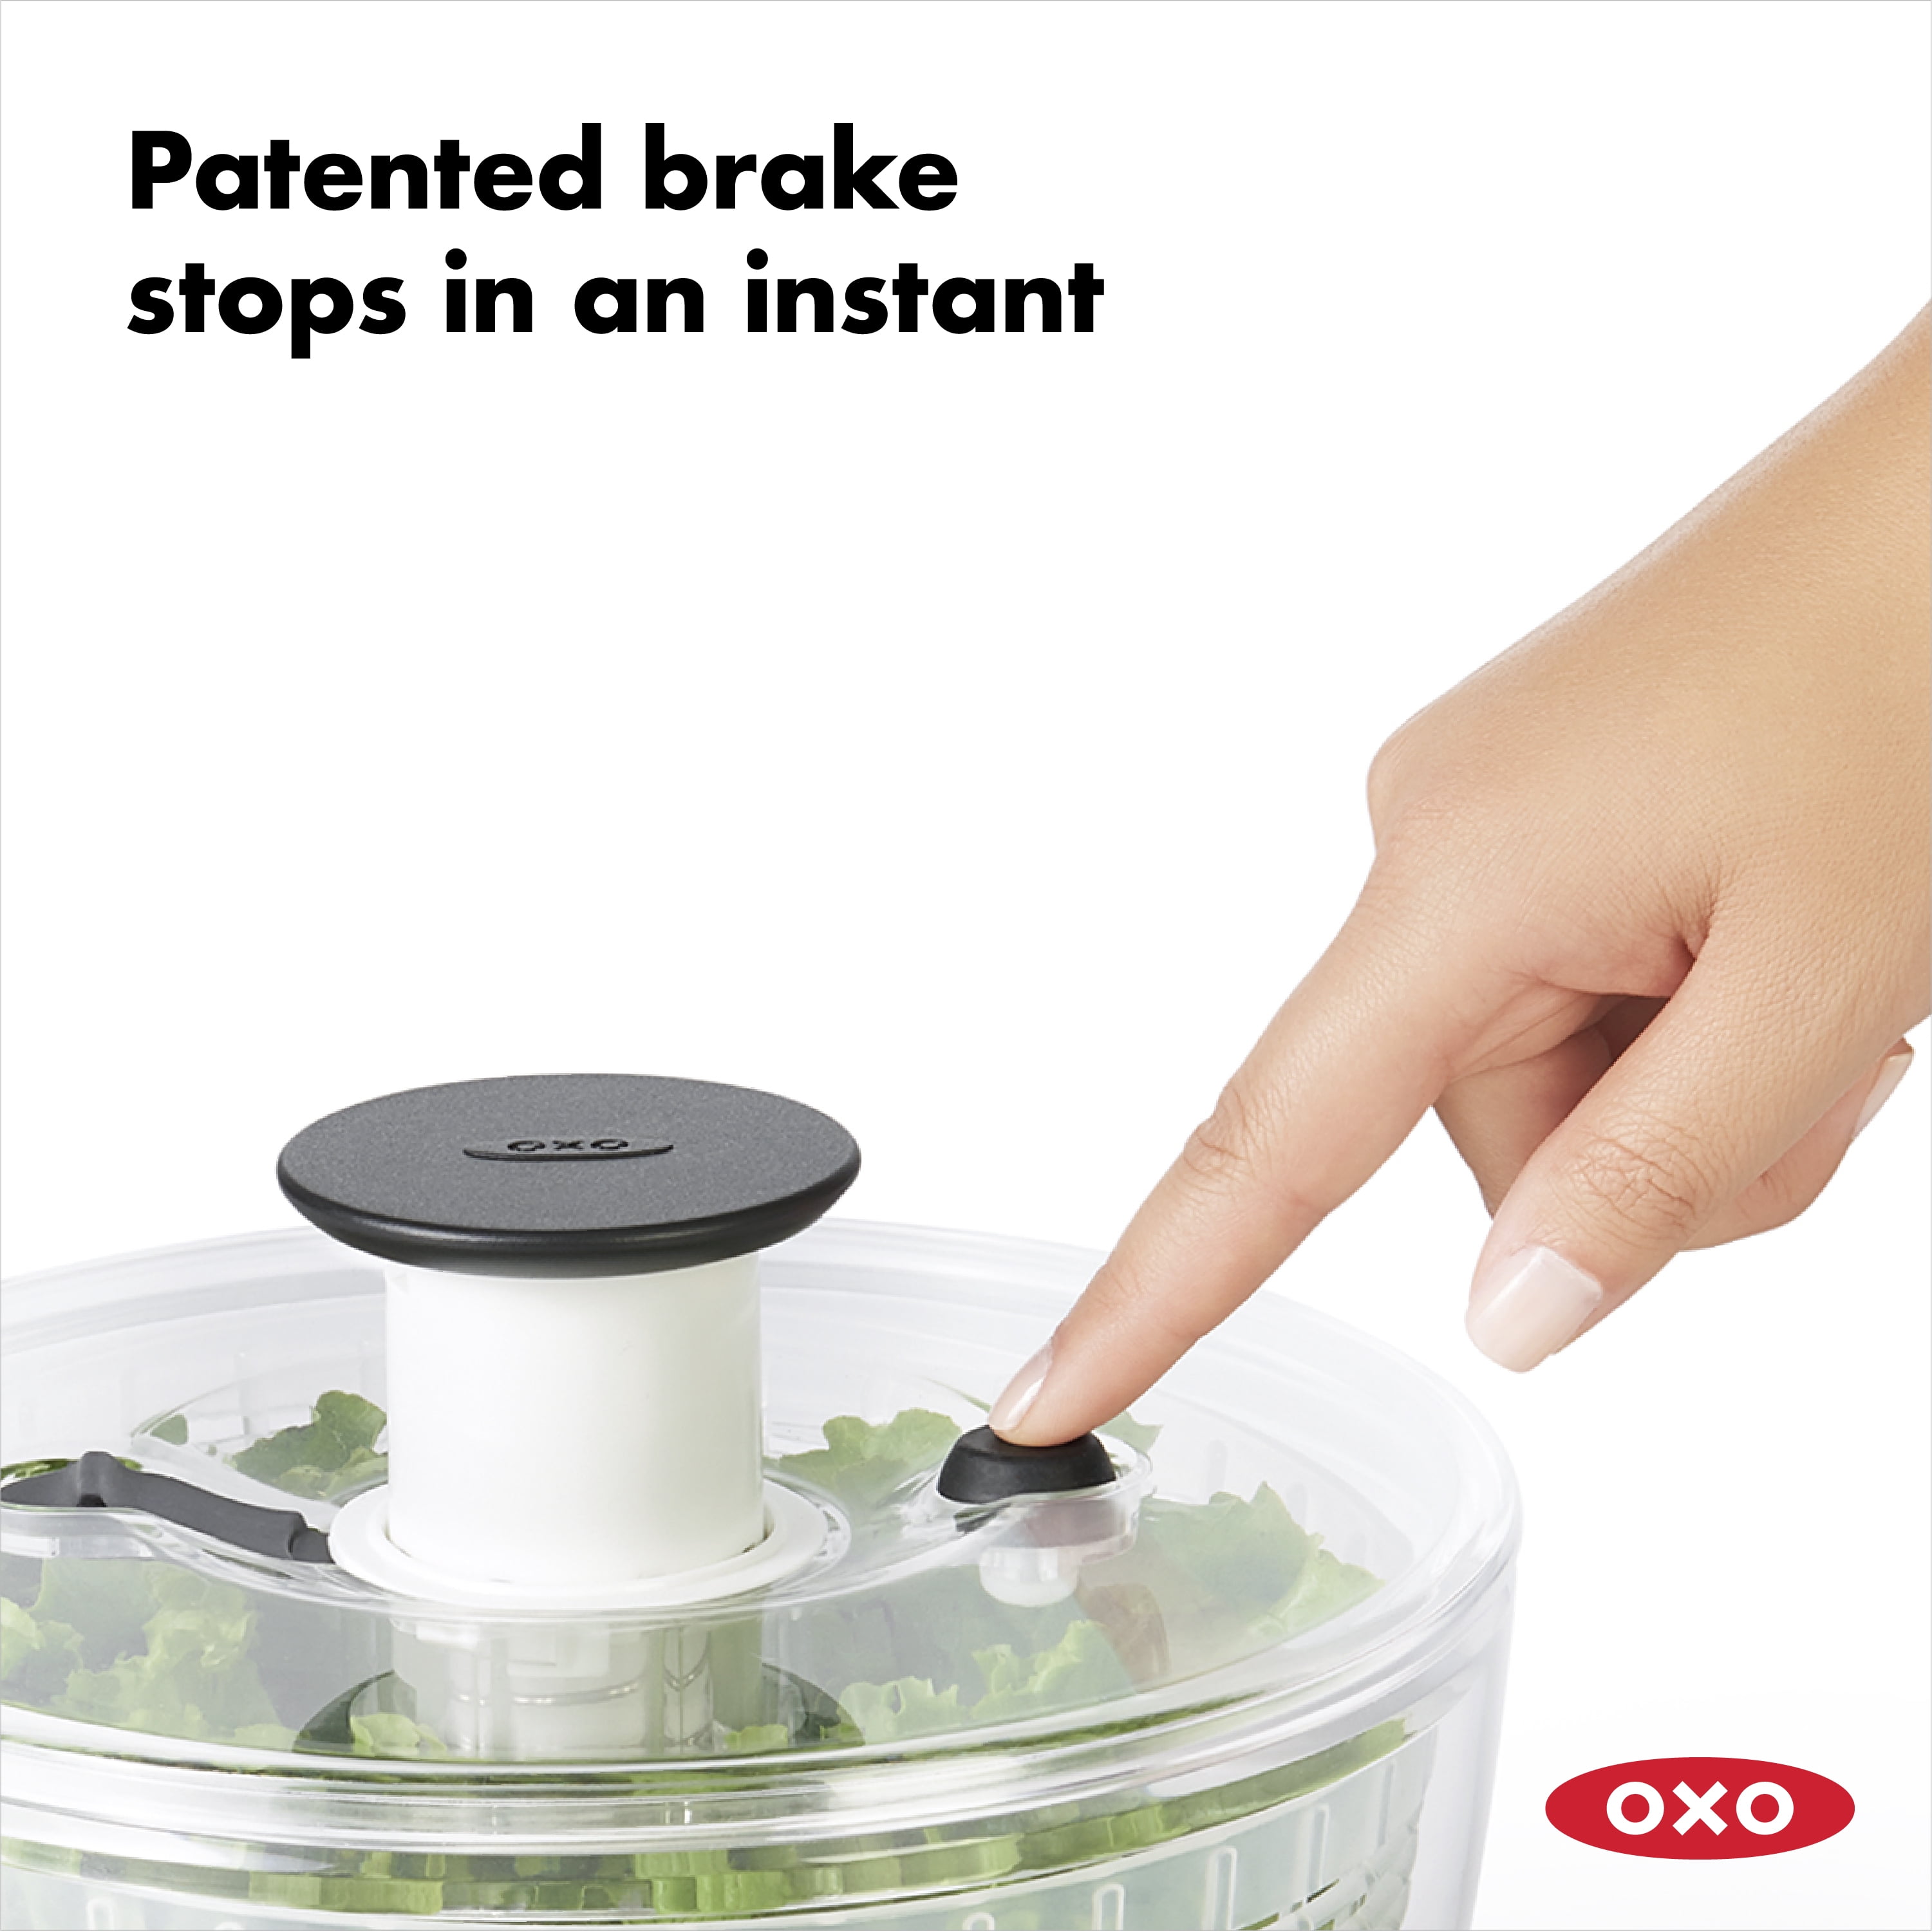 Oxo Good Grips Salad Spinner, Clear/Green